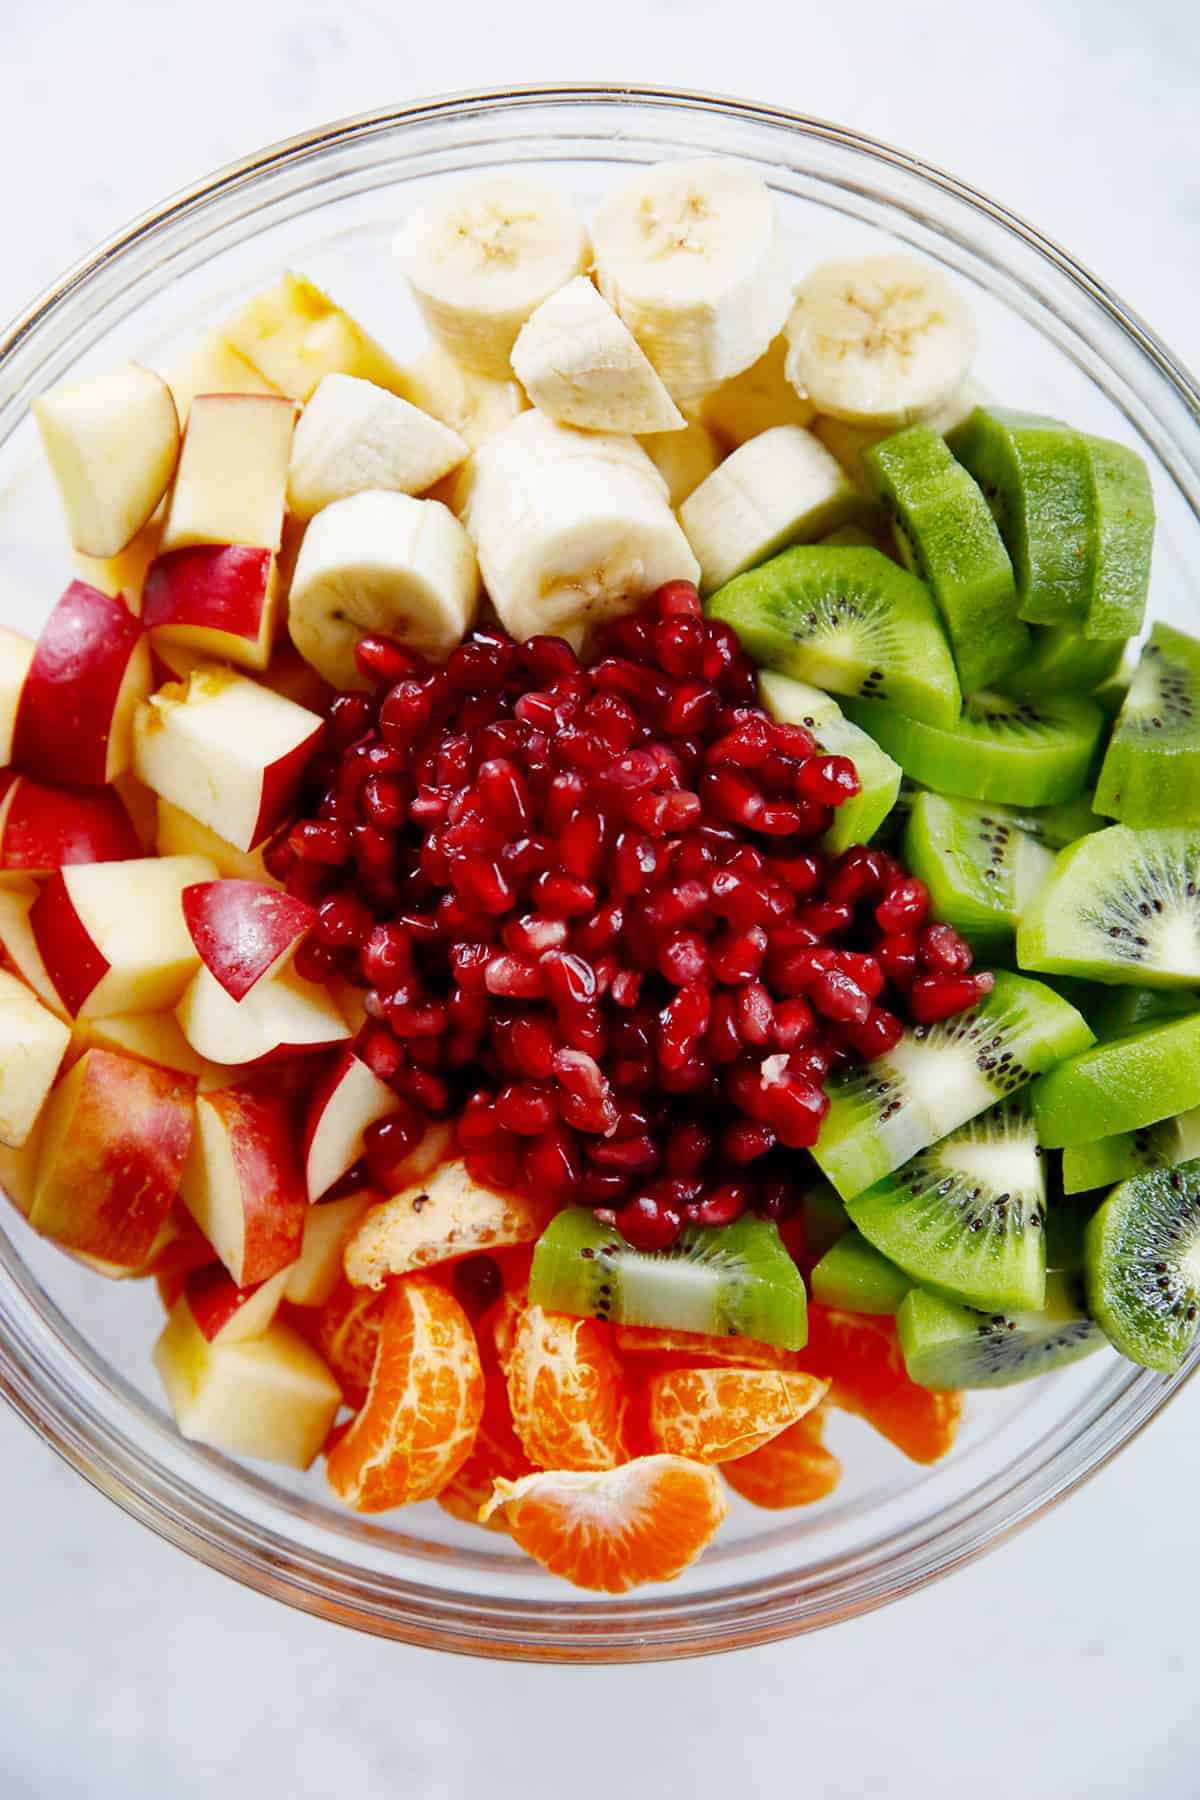 Winter fruit salad ingredients in a mixing bowl.